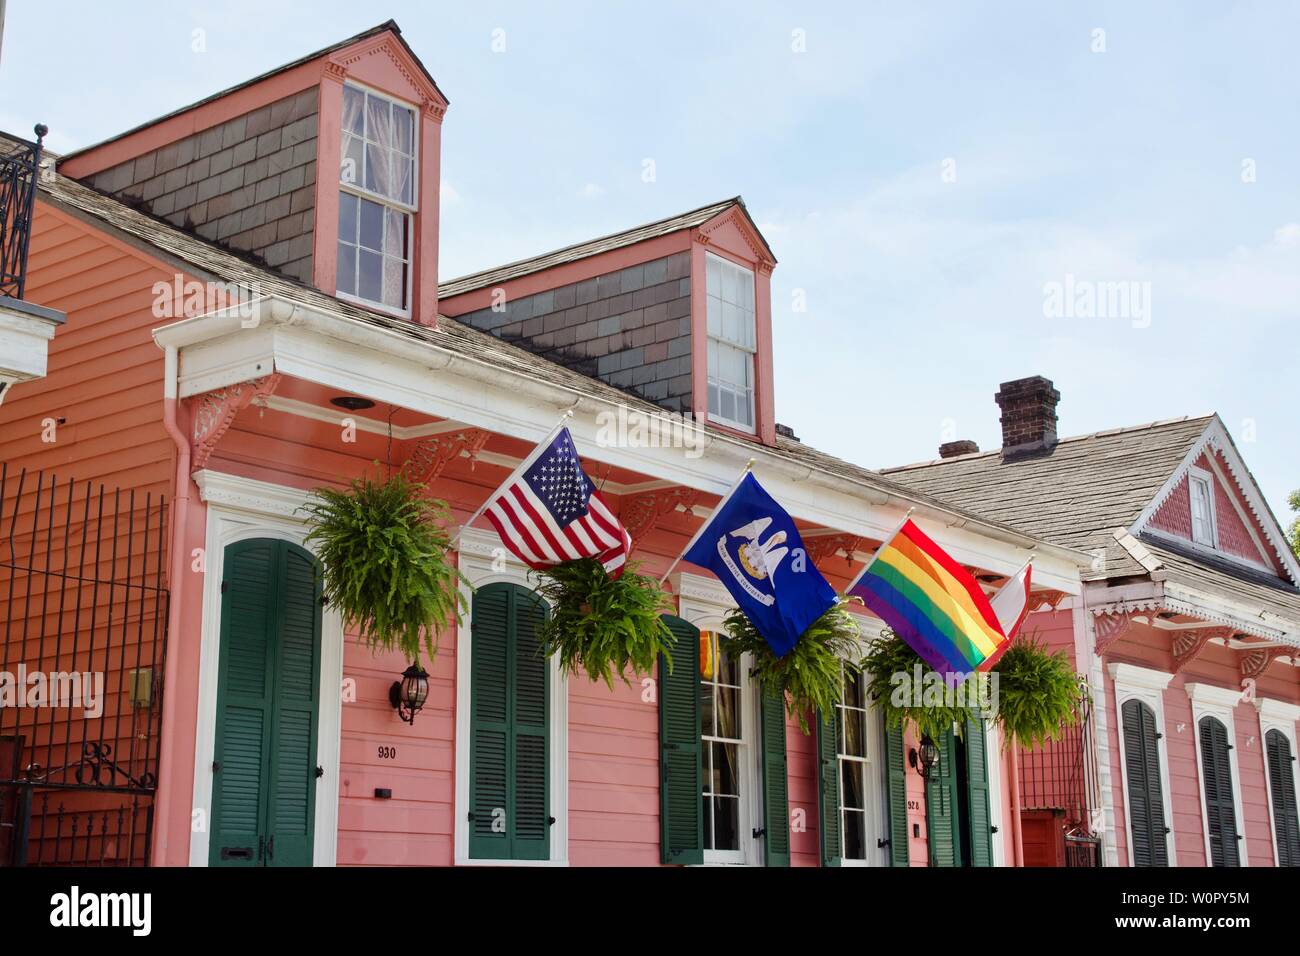 Flags outside of a pink house with green shutters in New Orleans Stock Photo